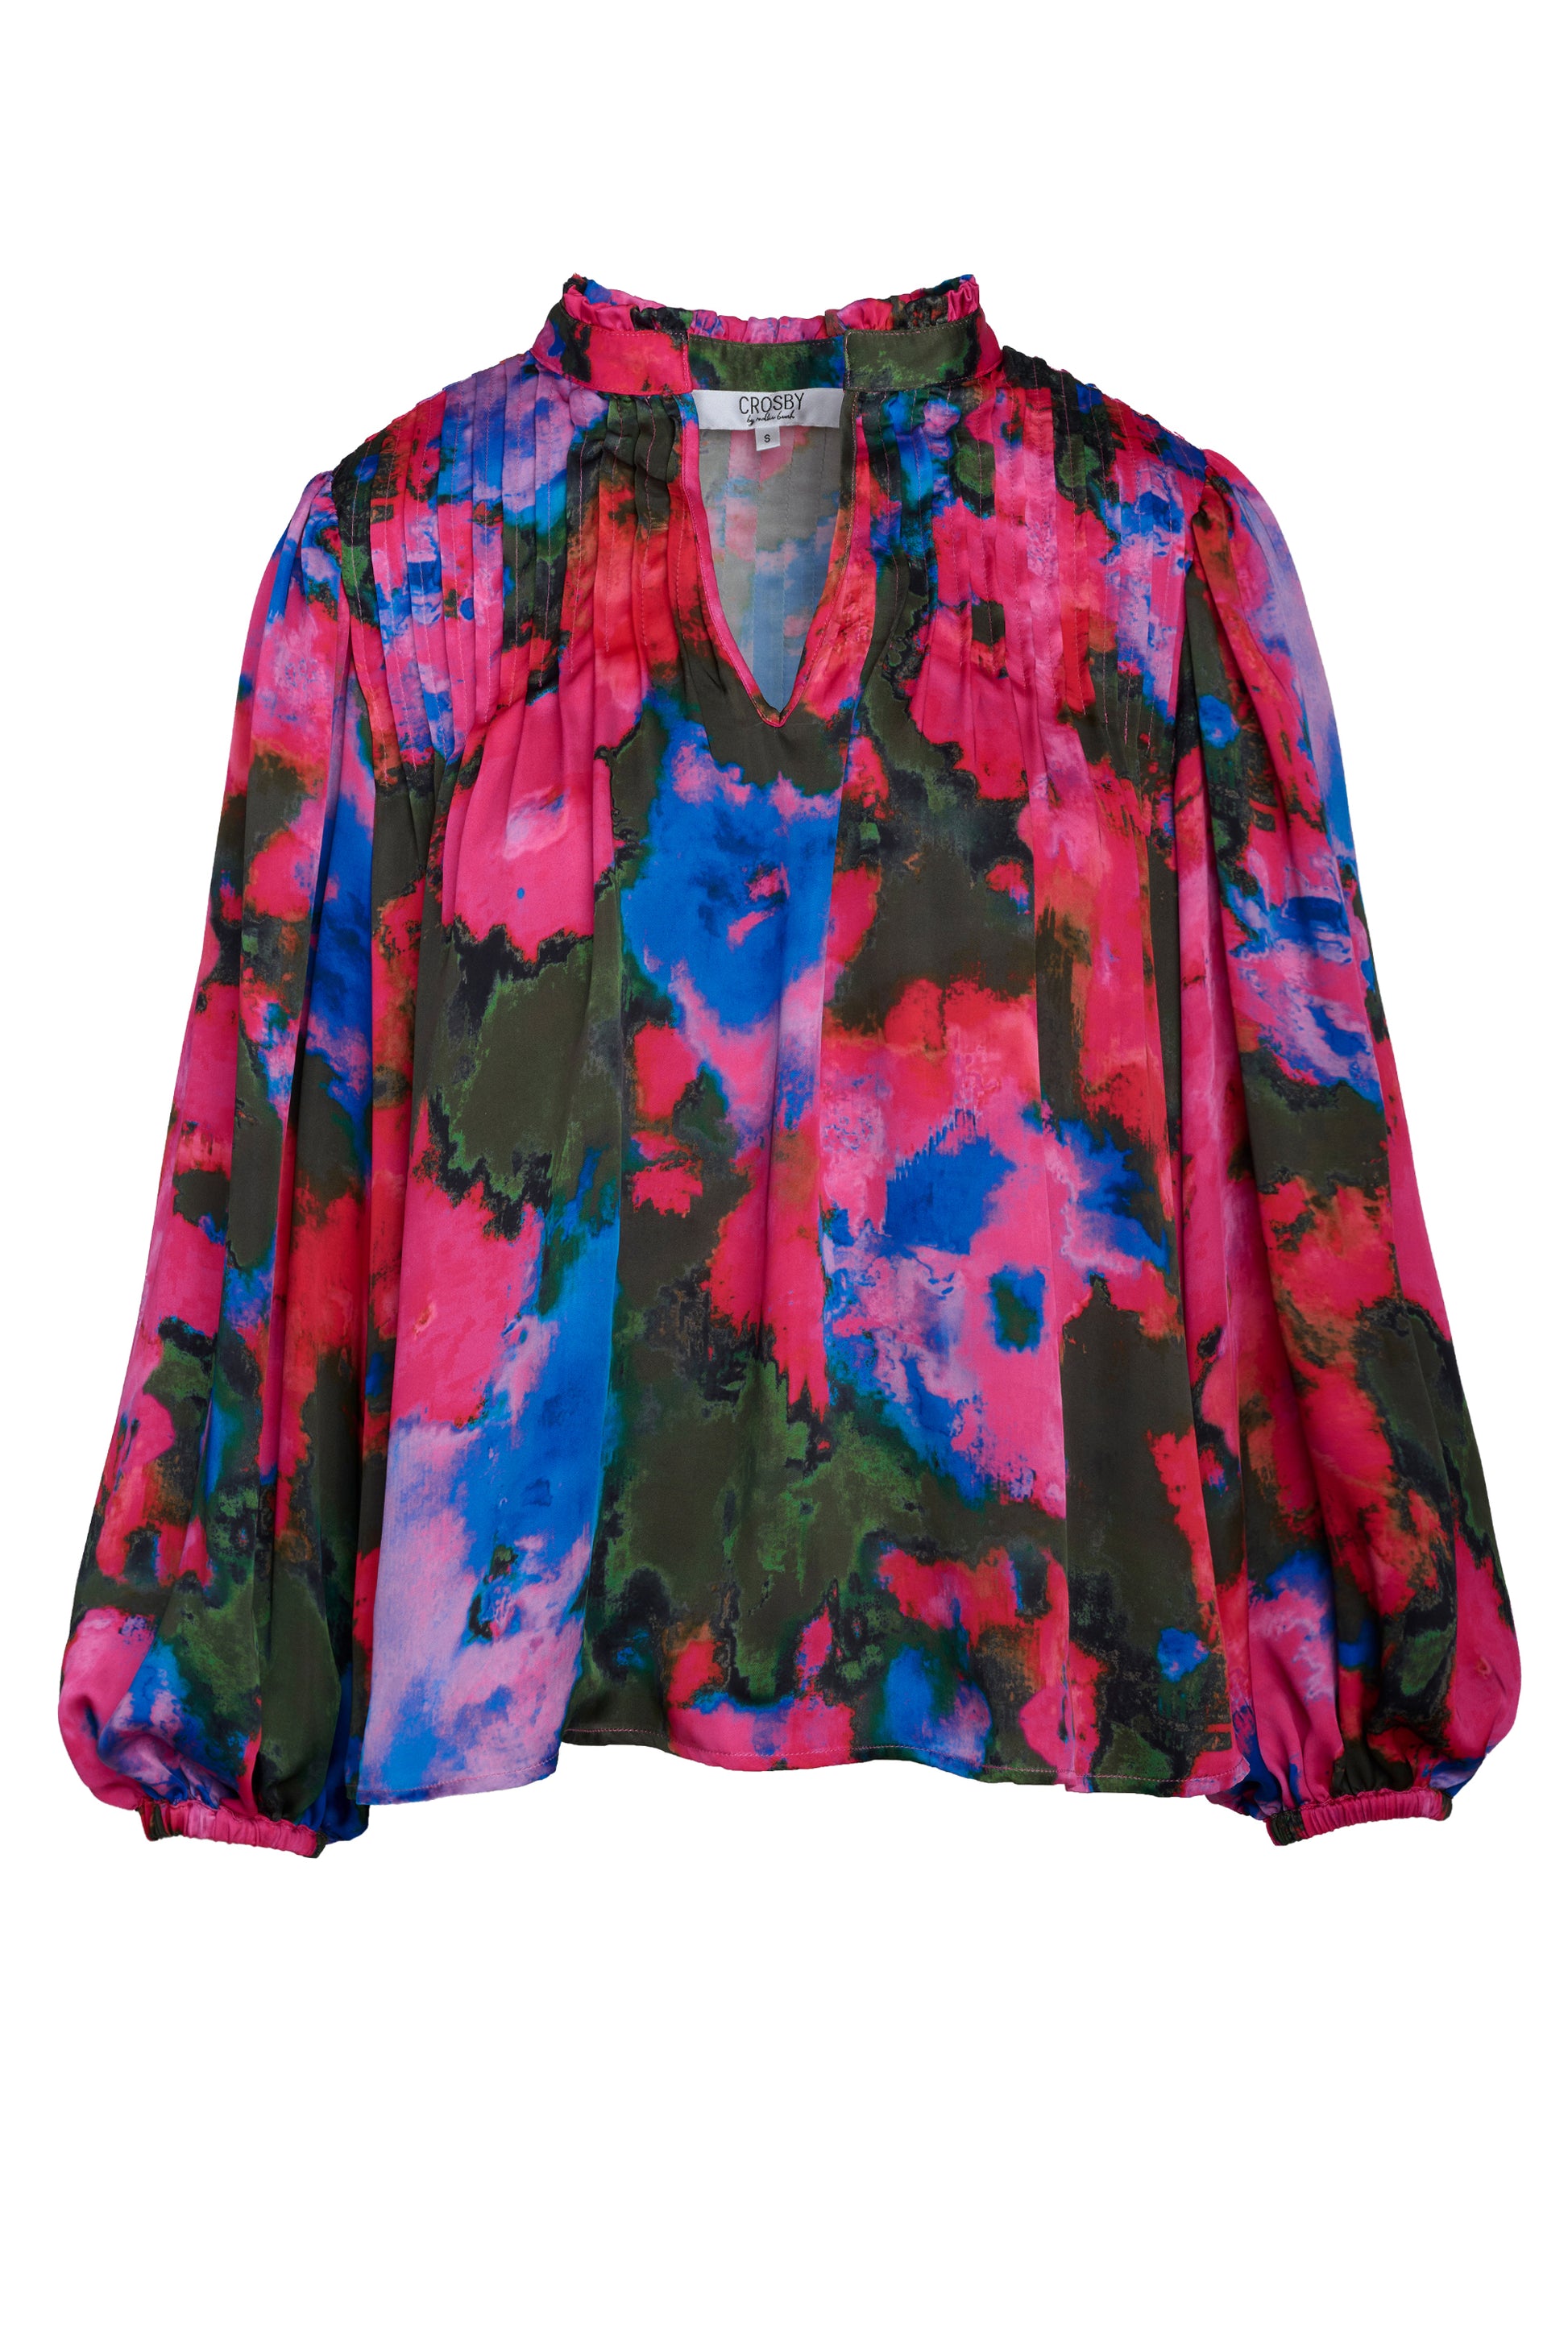 Gabby Blouse in Blurred Floral Bright | CROSBY by Mollie Burch